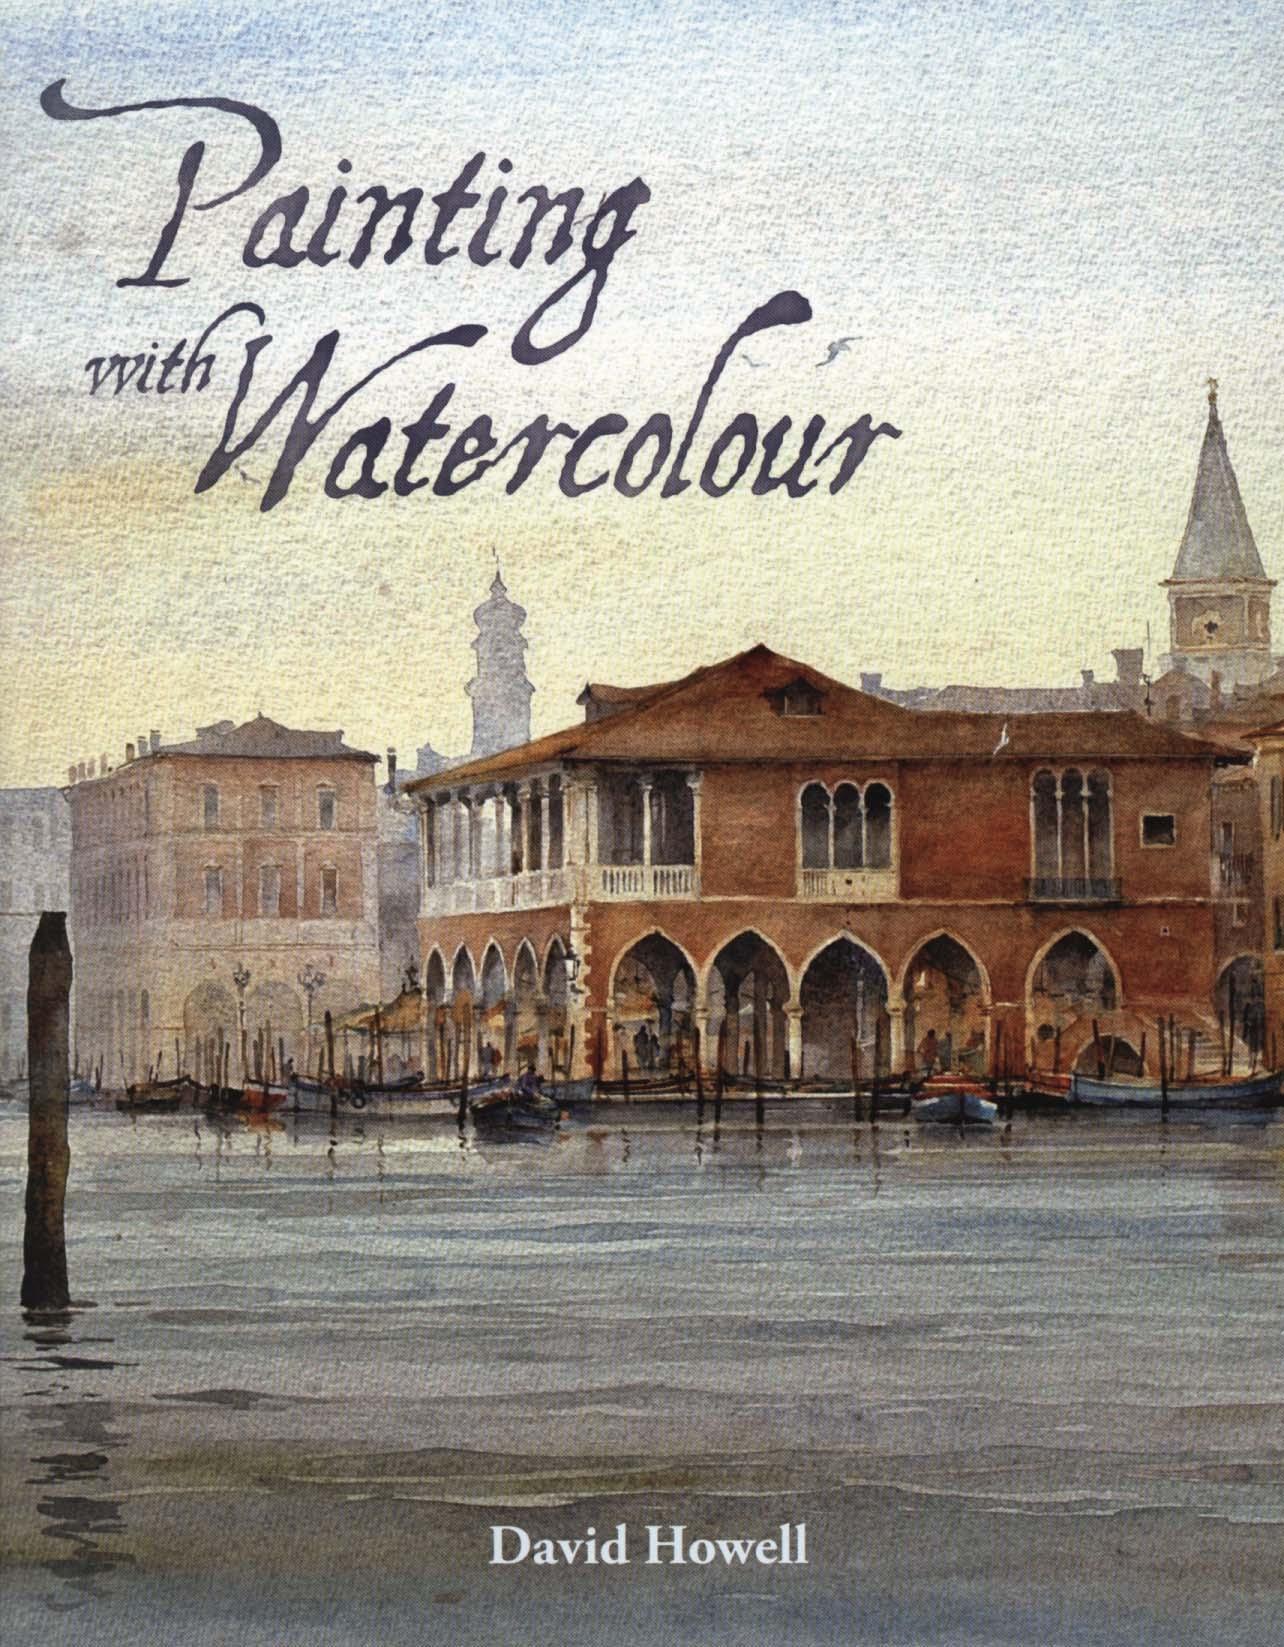 Painting with Watercolour - David Howell